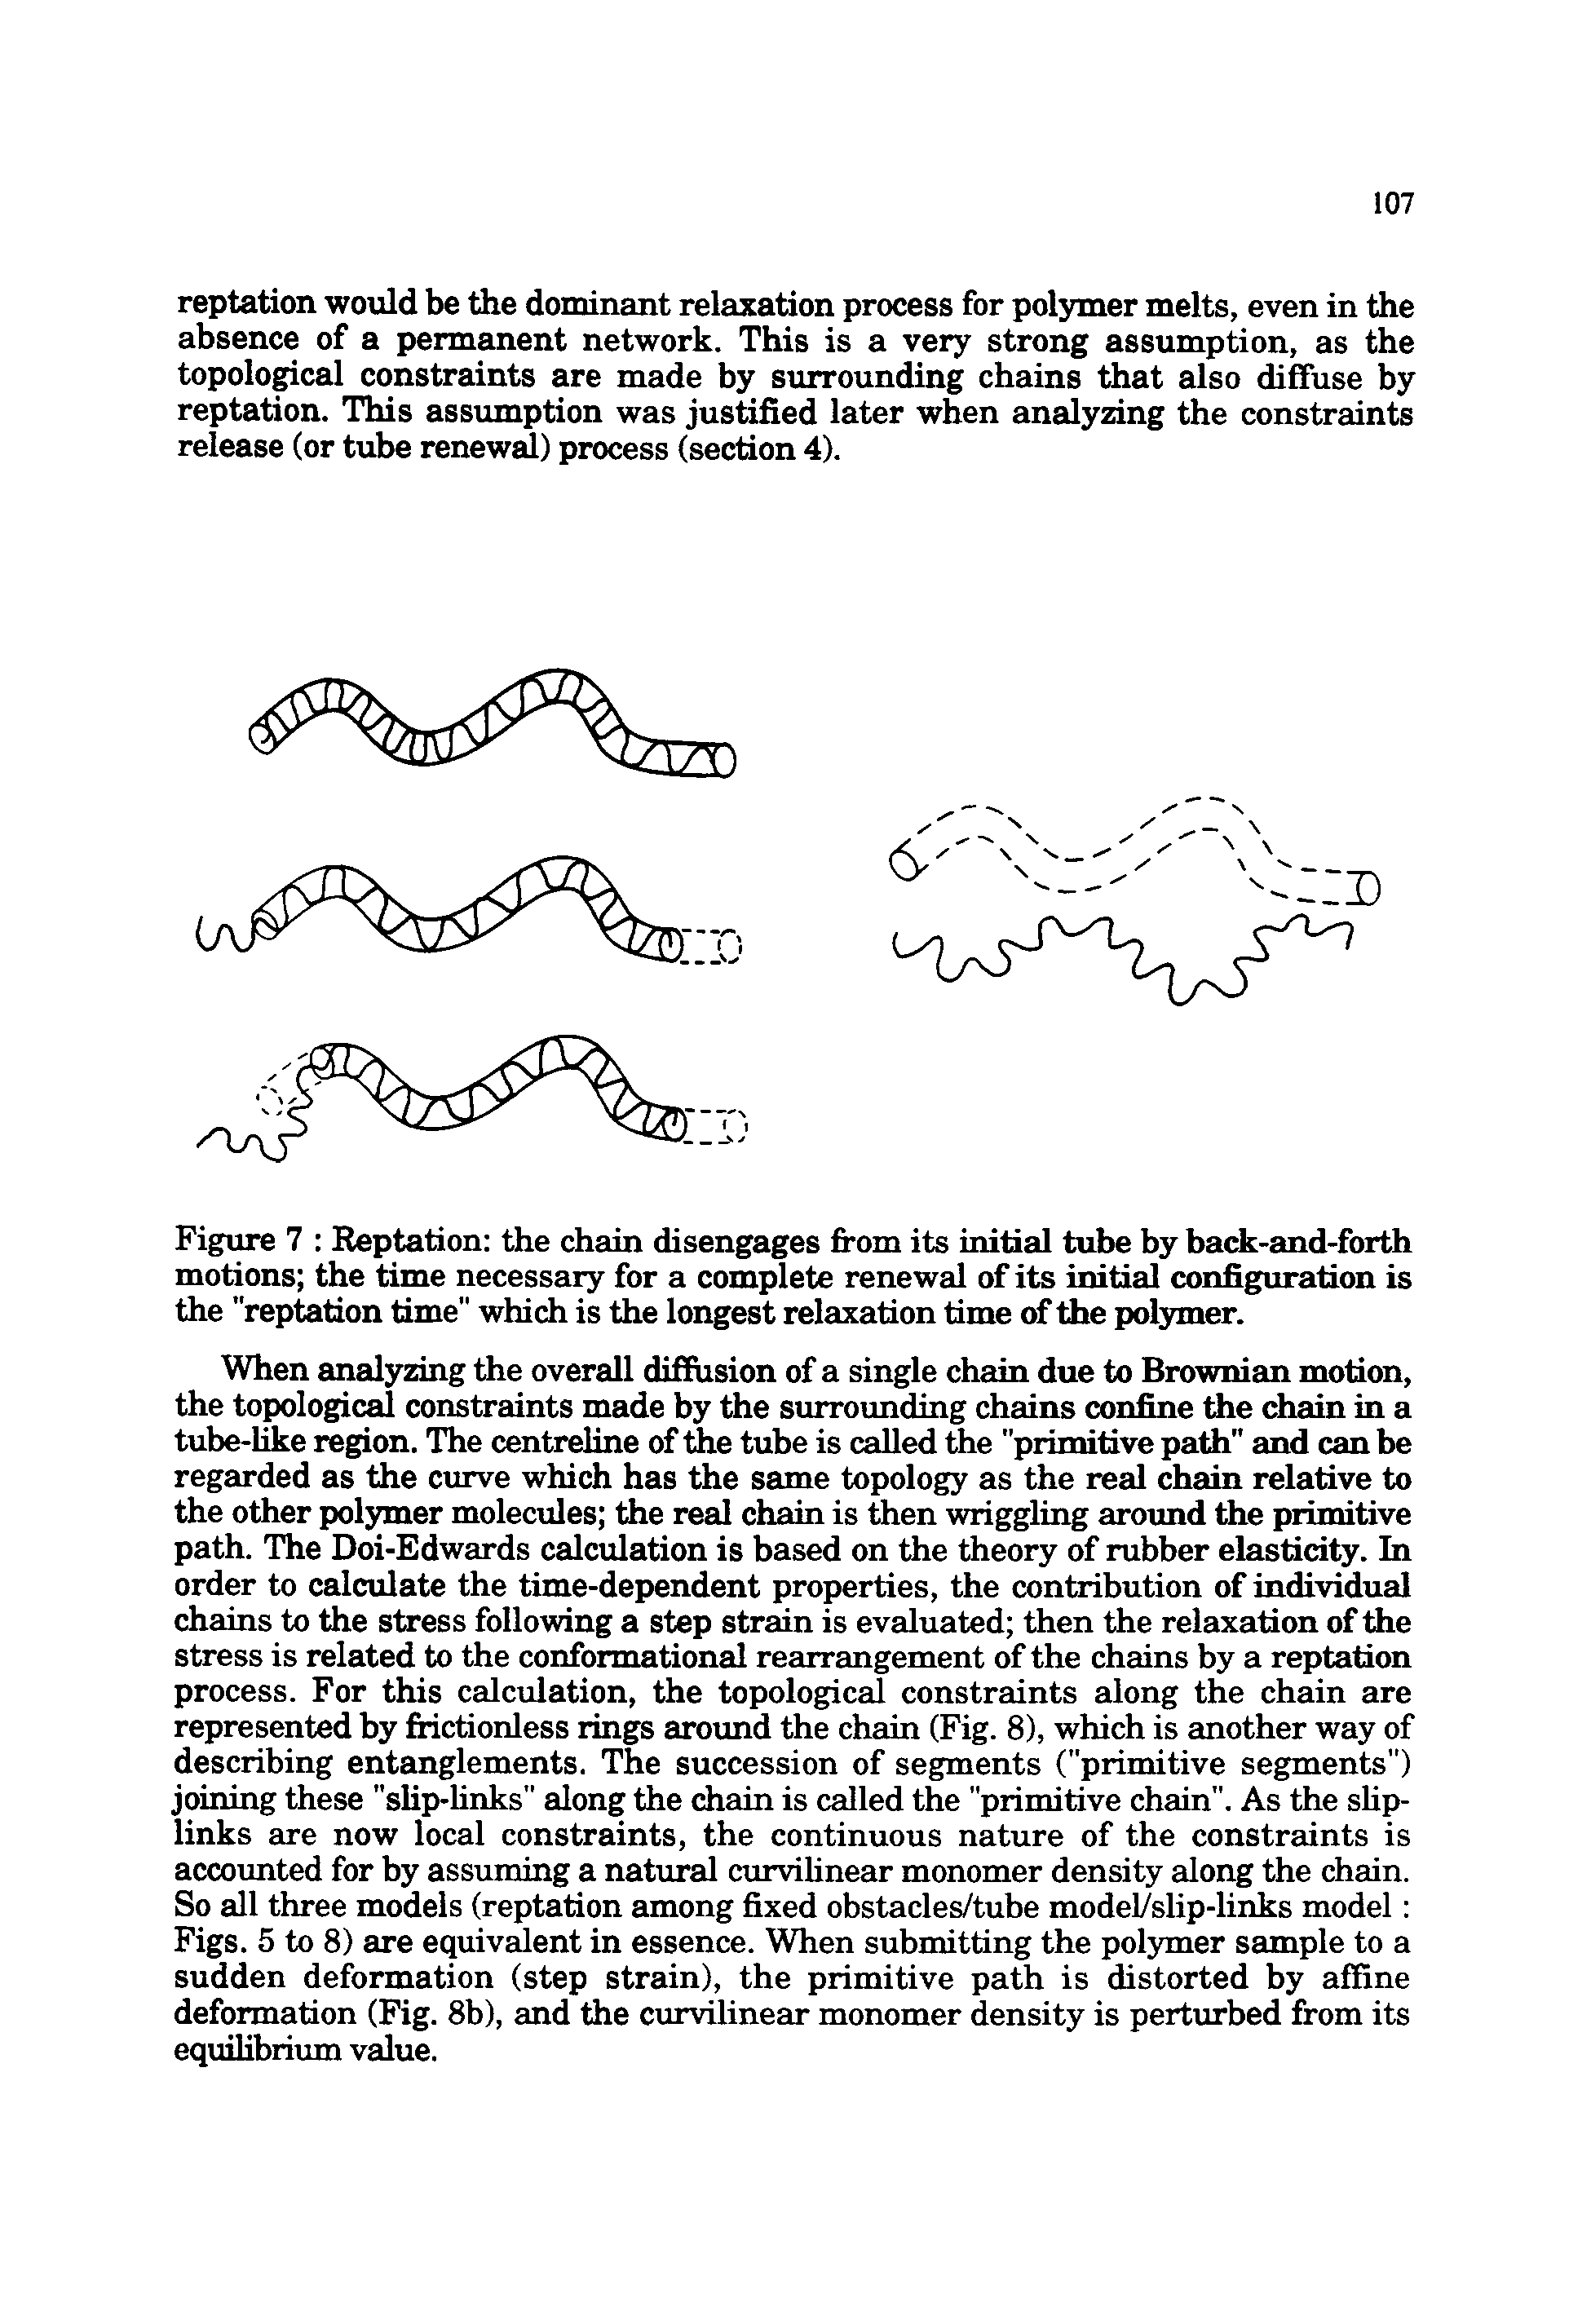 Figure 7 Reptation the chain disengages fi-om its initial tube by back-and-forth motions the time necessary for a complete renewal of its initial configuration is the "reptation time" which is the longest relaxation time of the polymer.